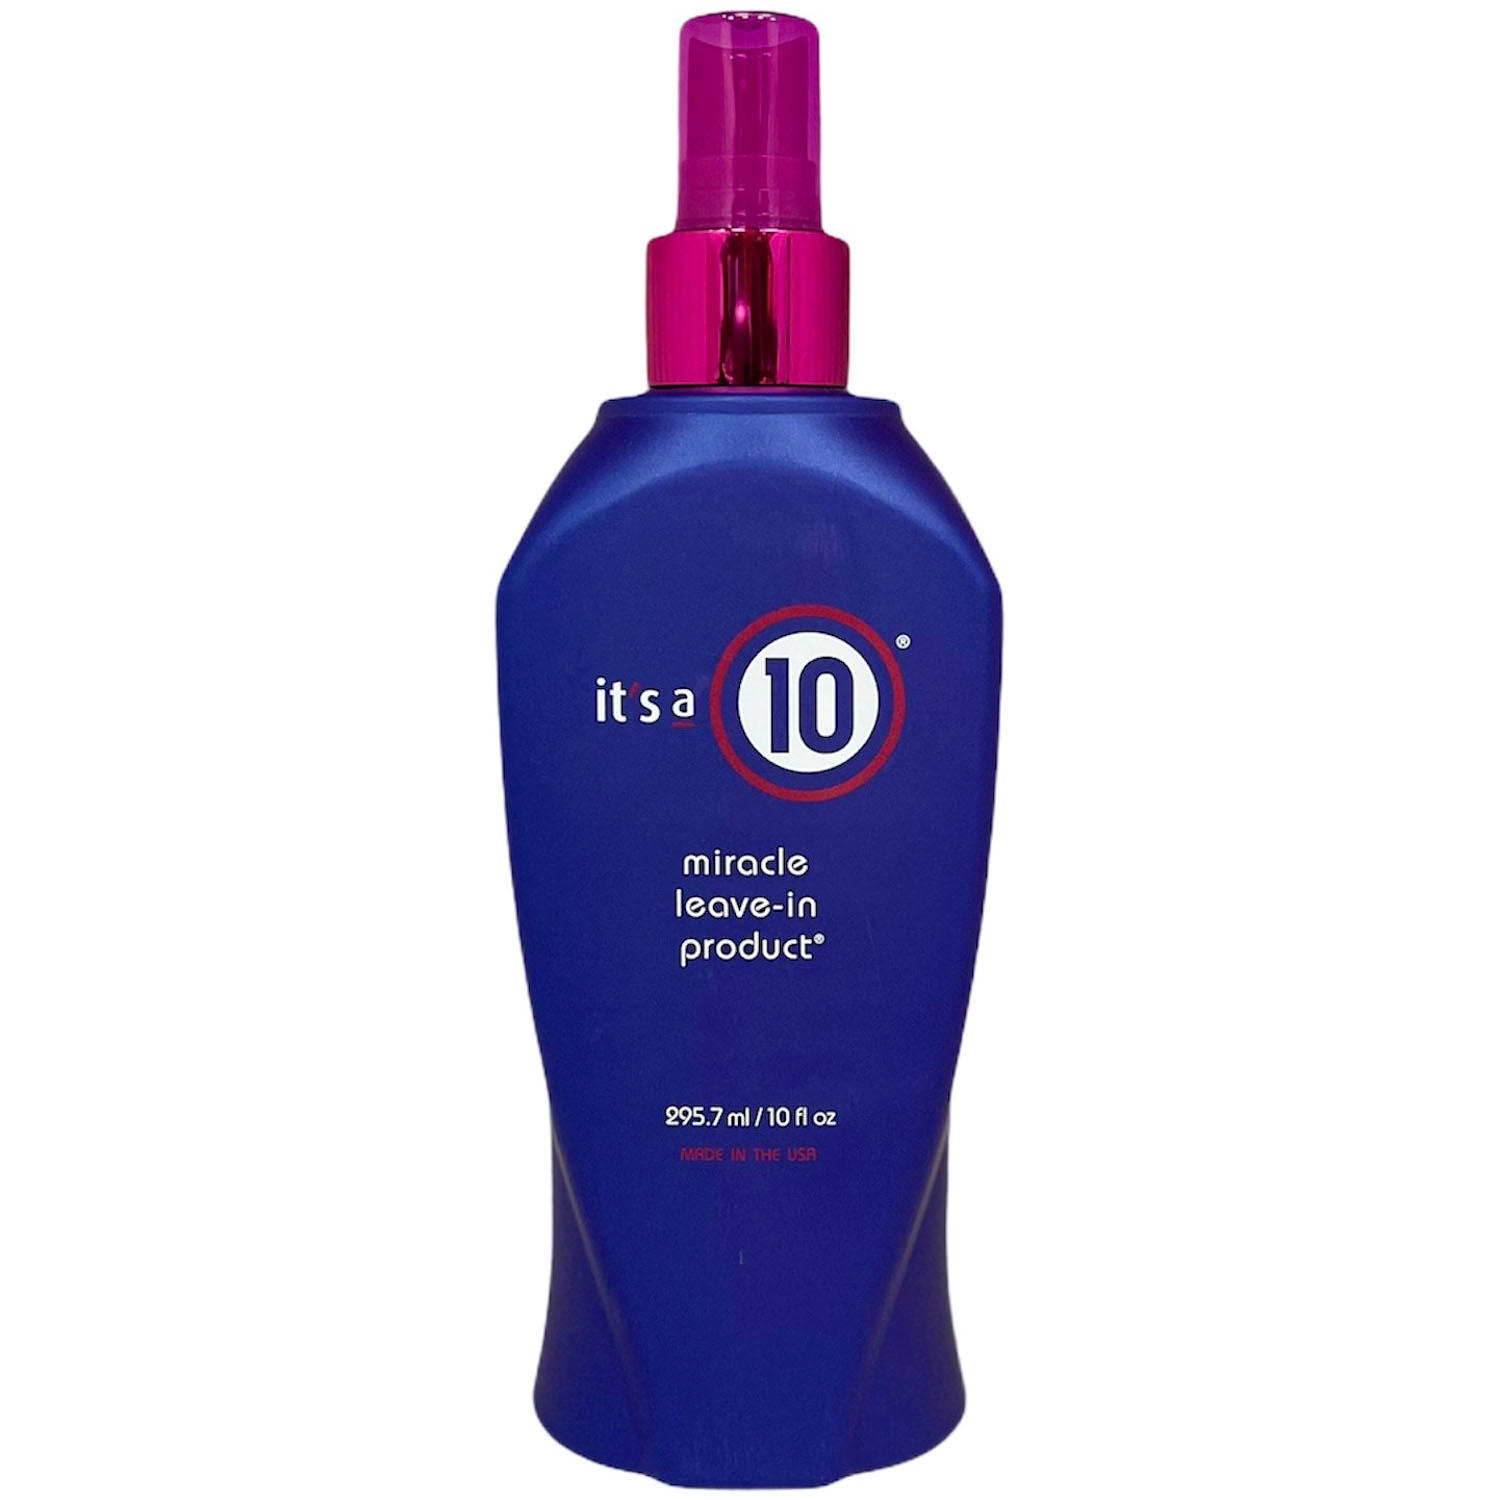 It’s A 10 Miracle Leave-In Conditioner Spray (10 oz.)